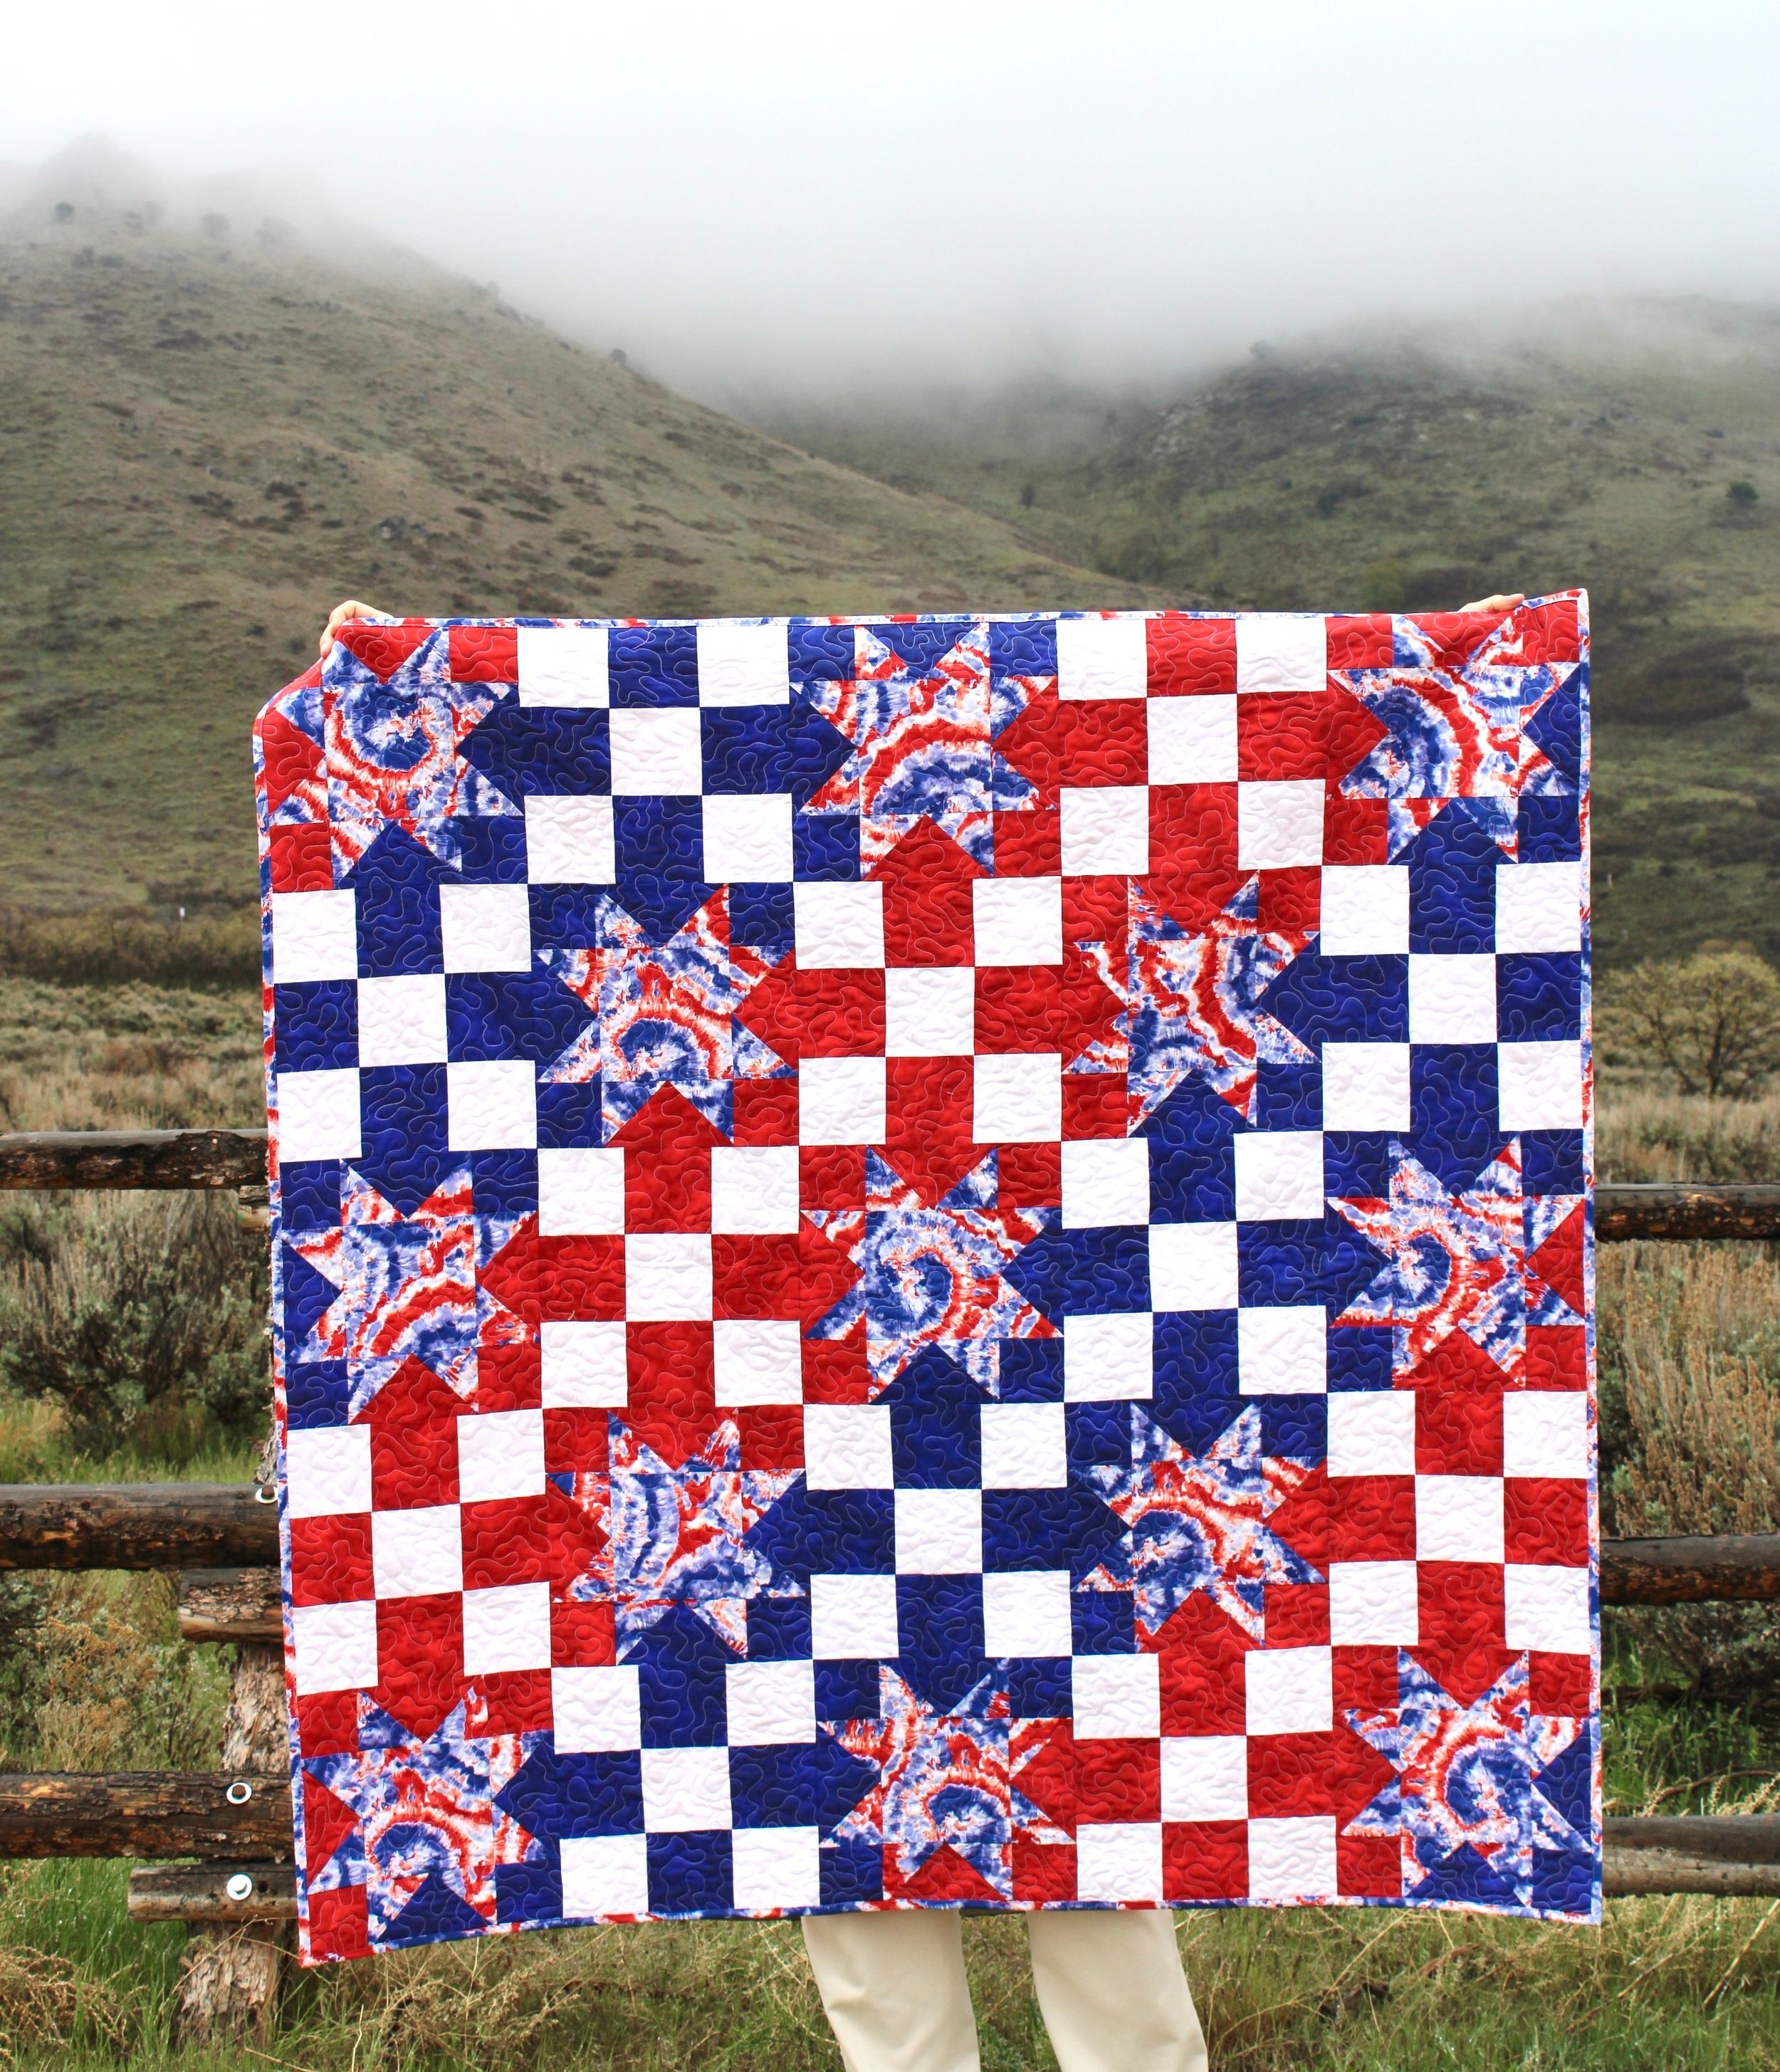 Blue Mountains Quilters, Memory quilt from shirts.